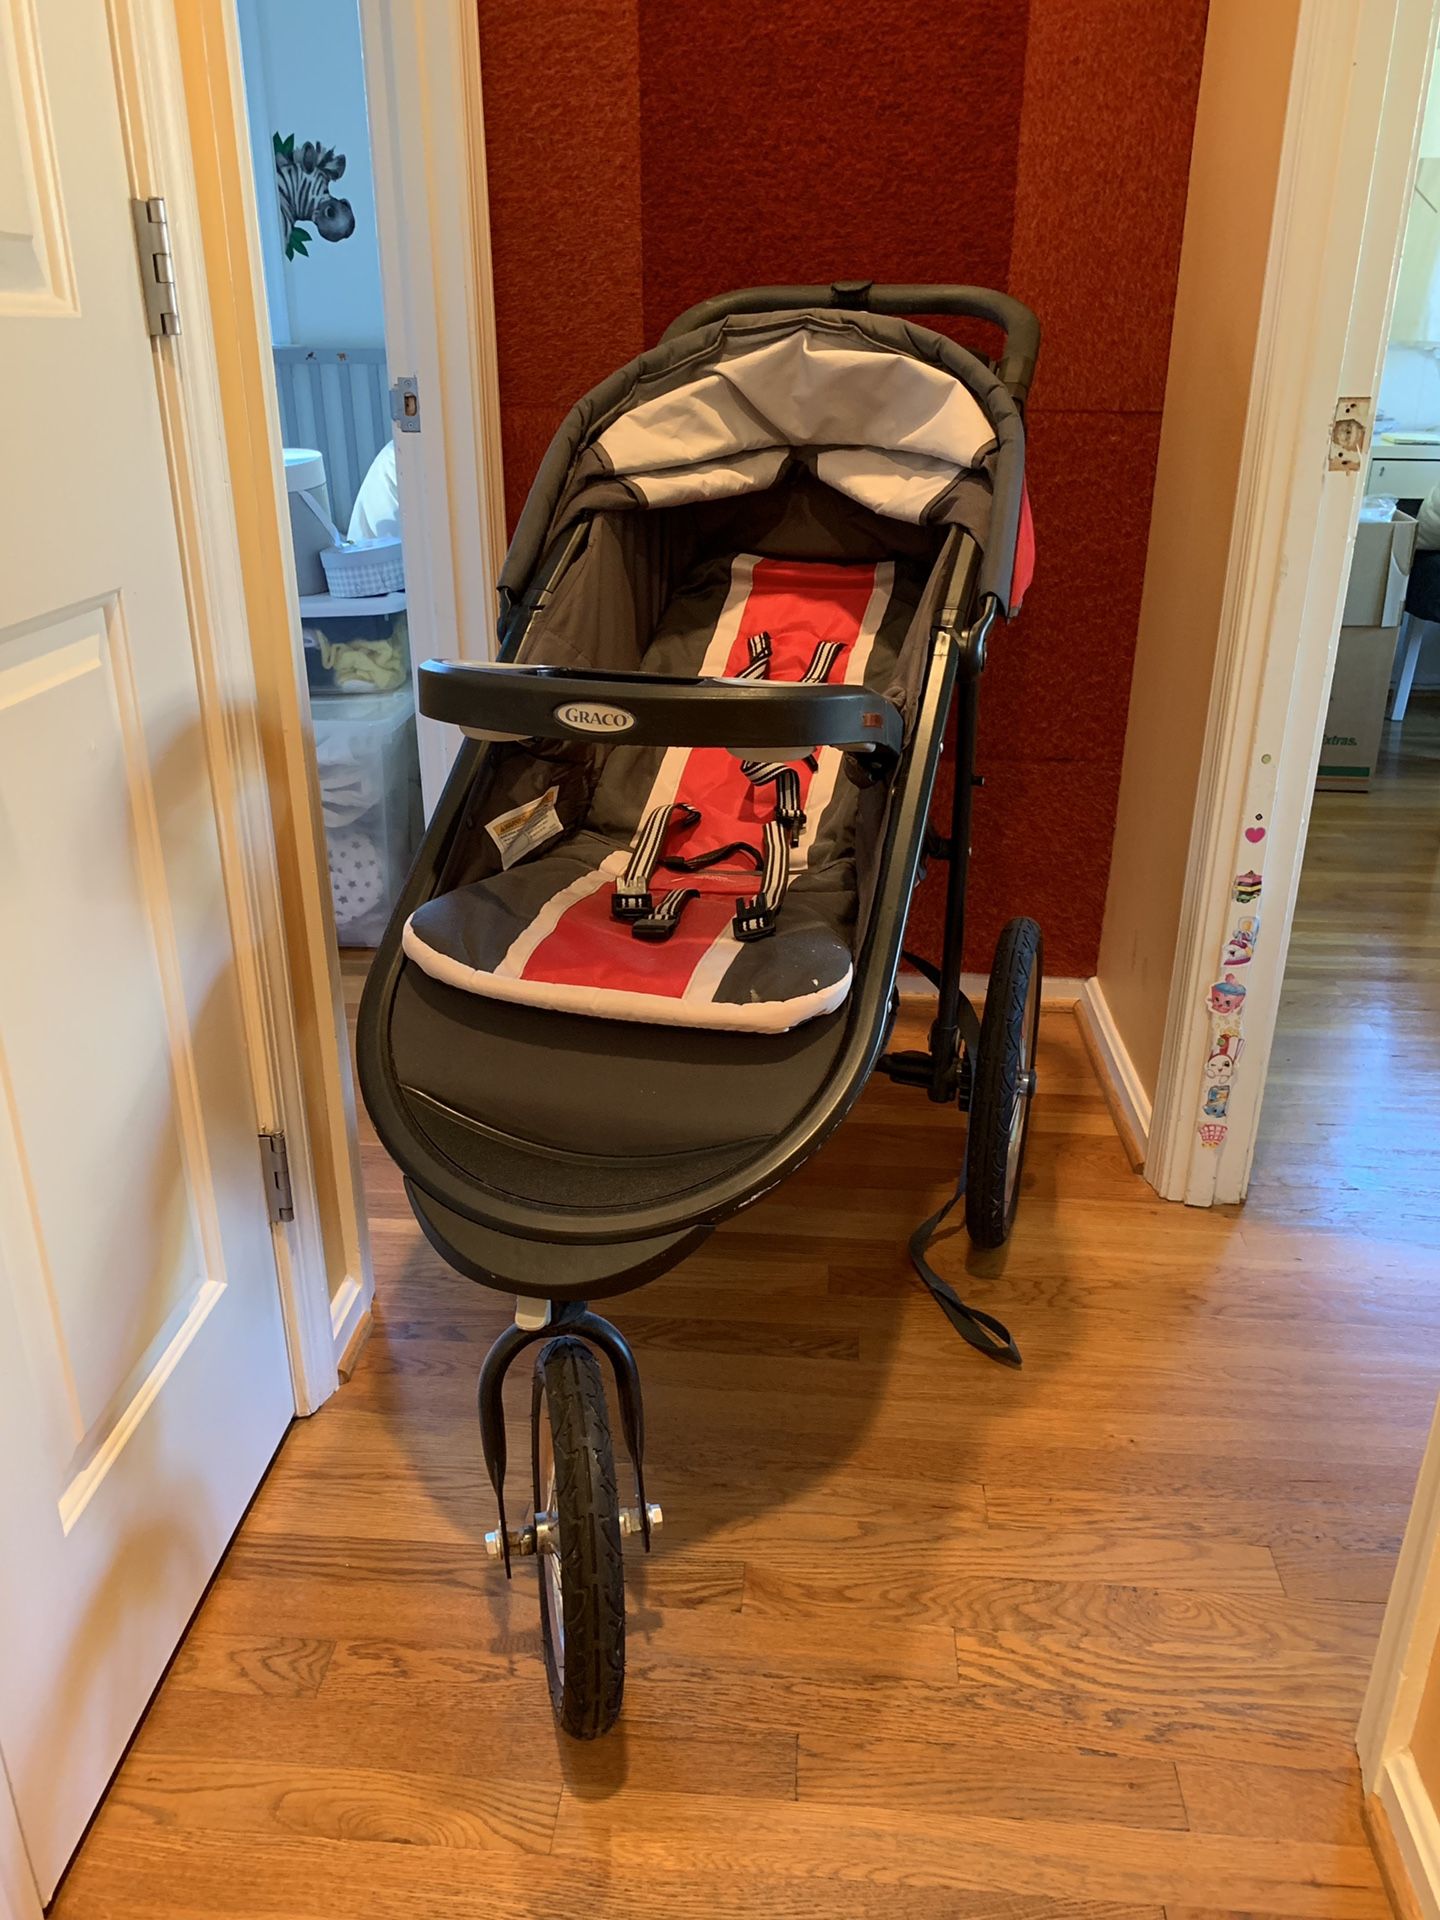 Graco running stroller with car seat